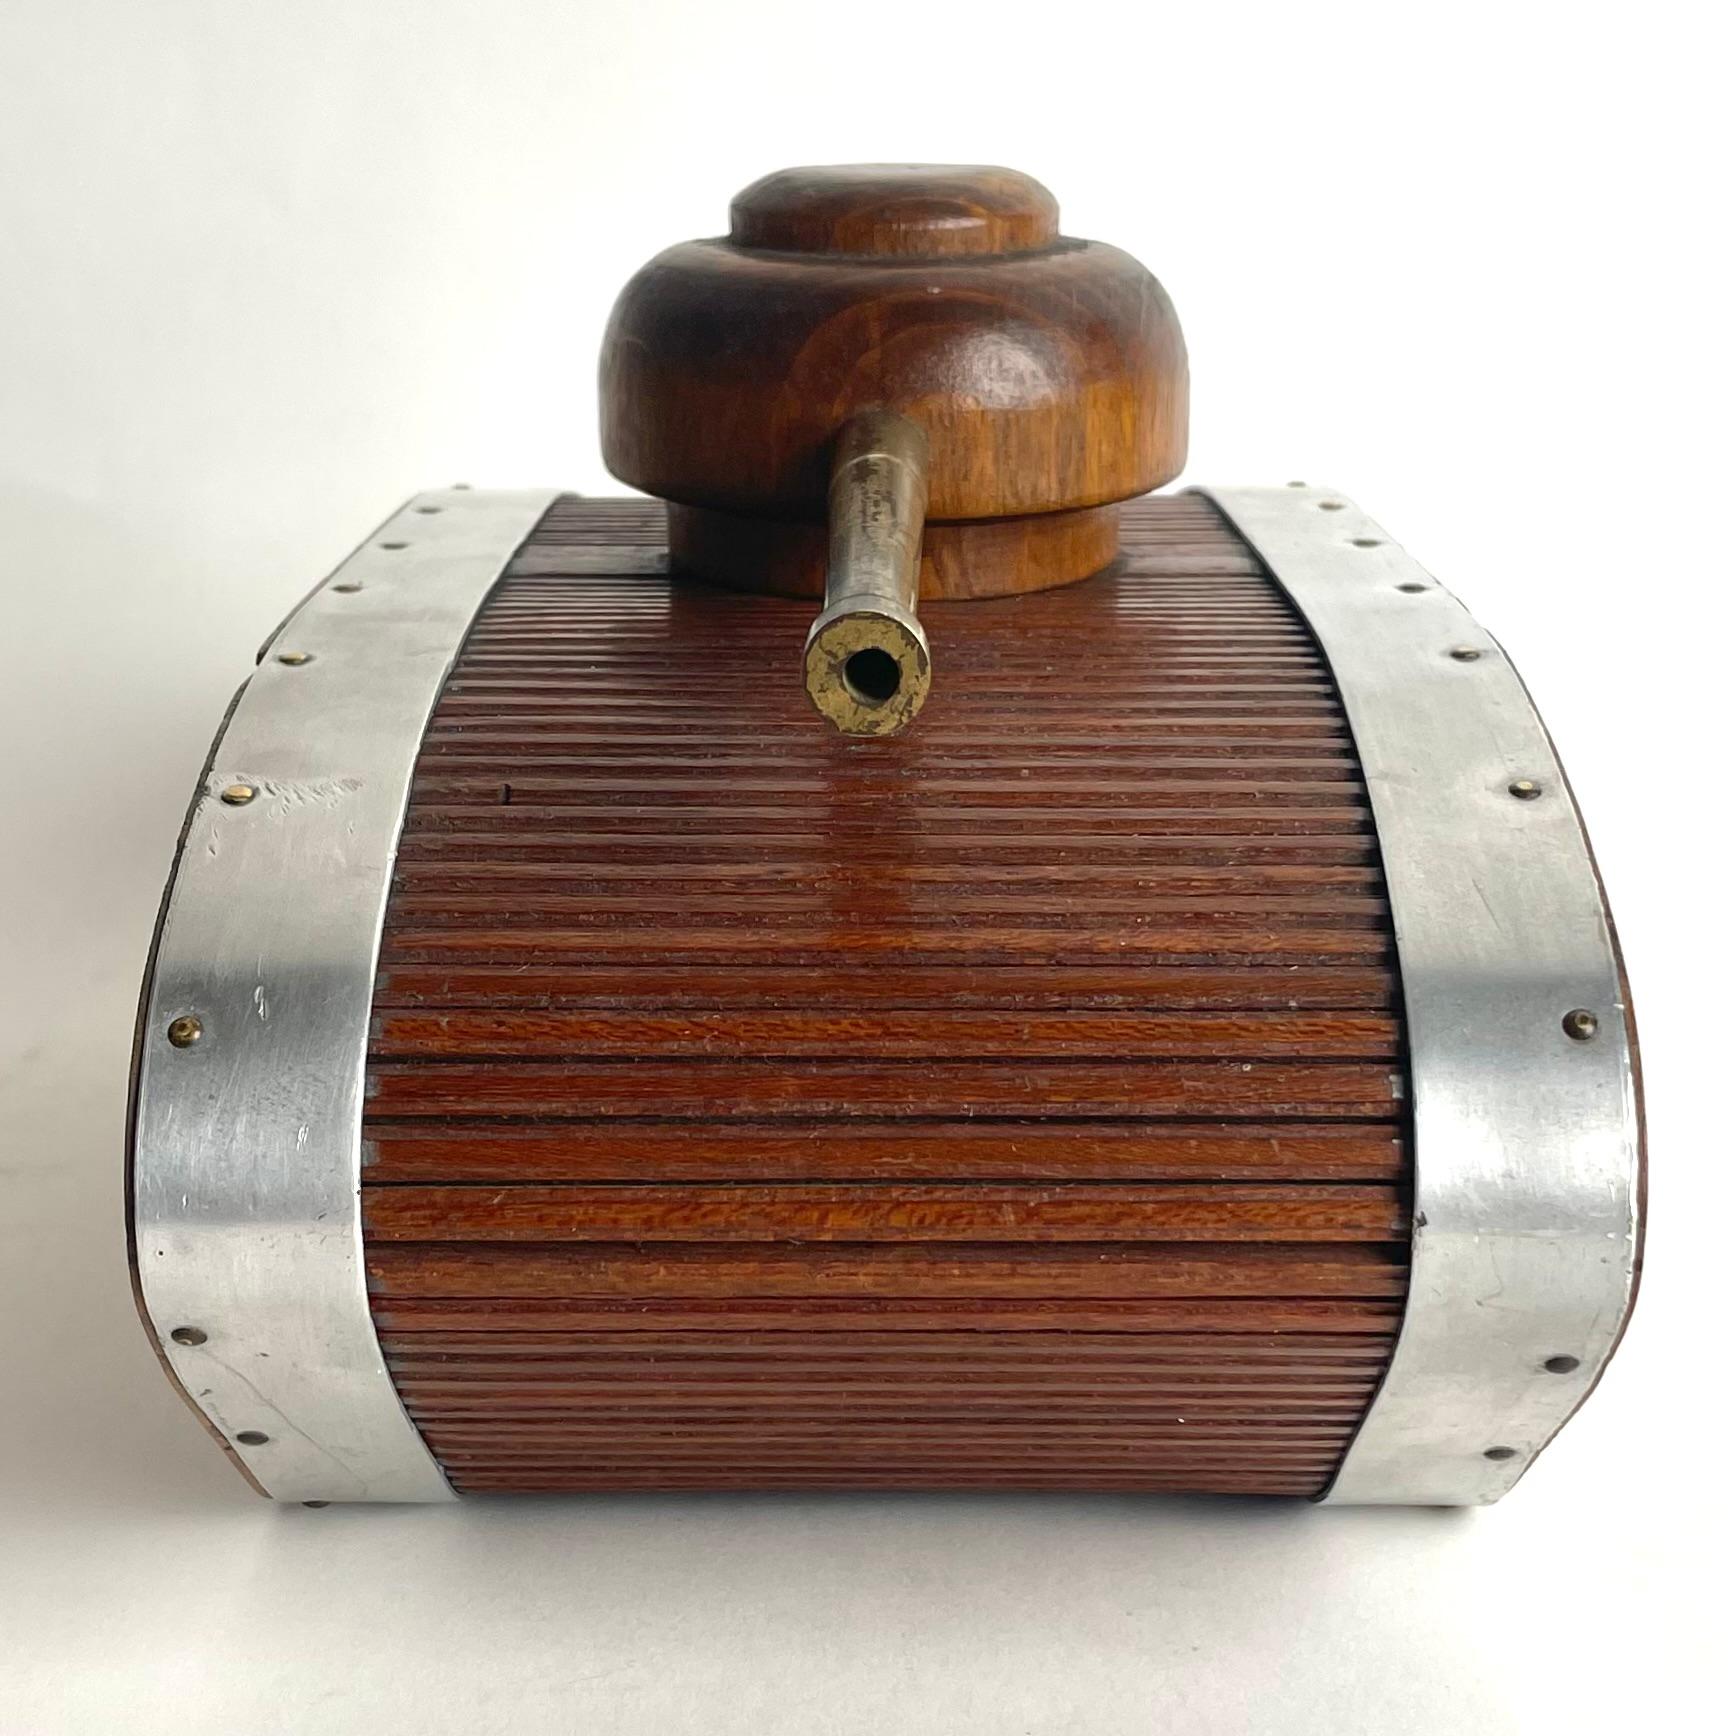 Mid-20th Century Decorative Cigar or Cigarette Box in the shape of a tank from the 1940s For Sale